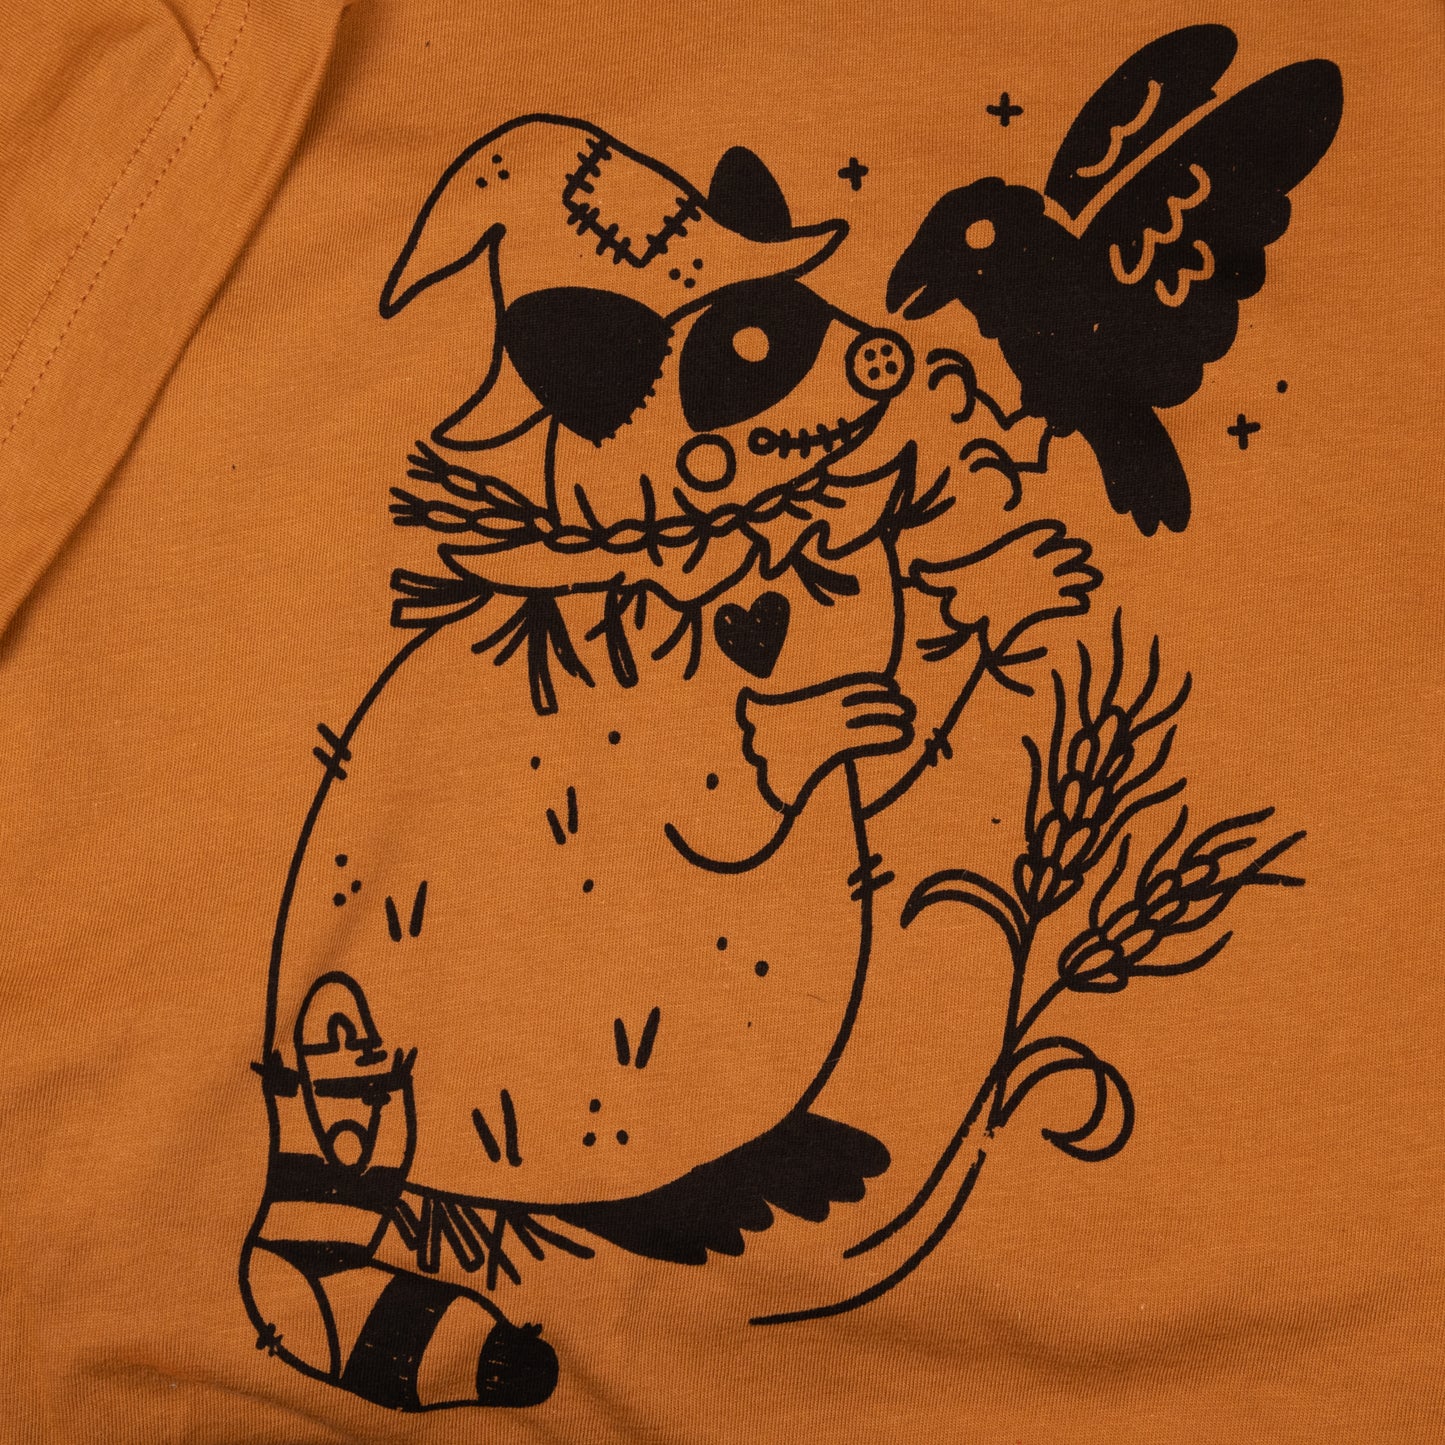 Scarecrow Racoon in Toast Brown T-Shirt